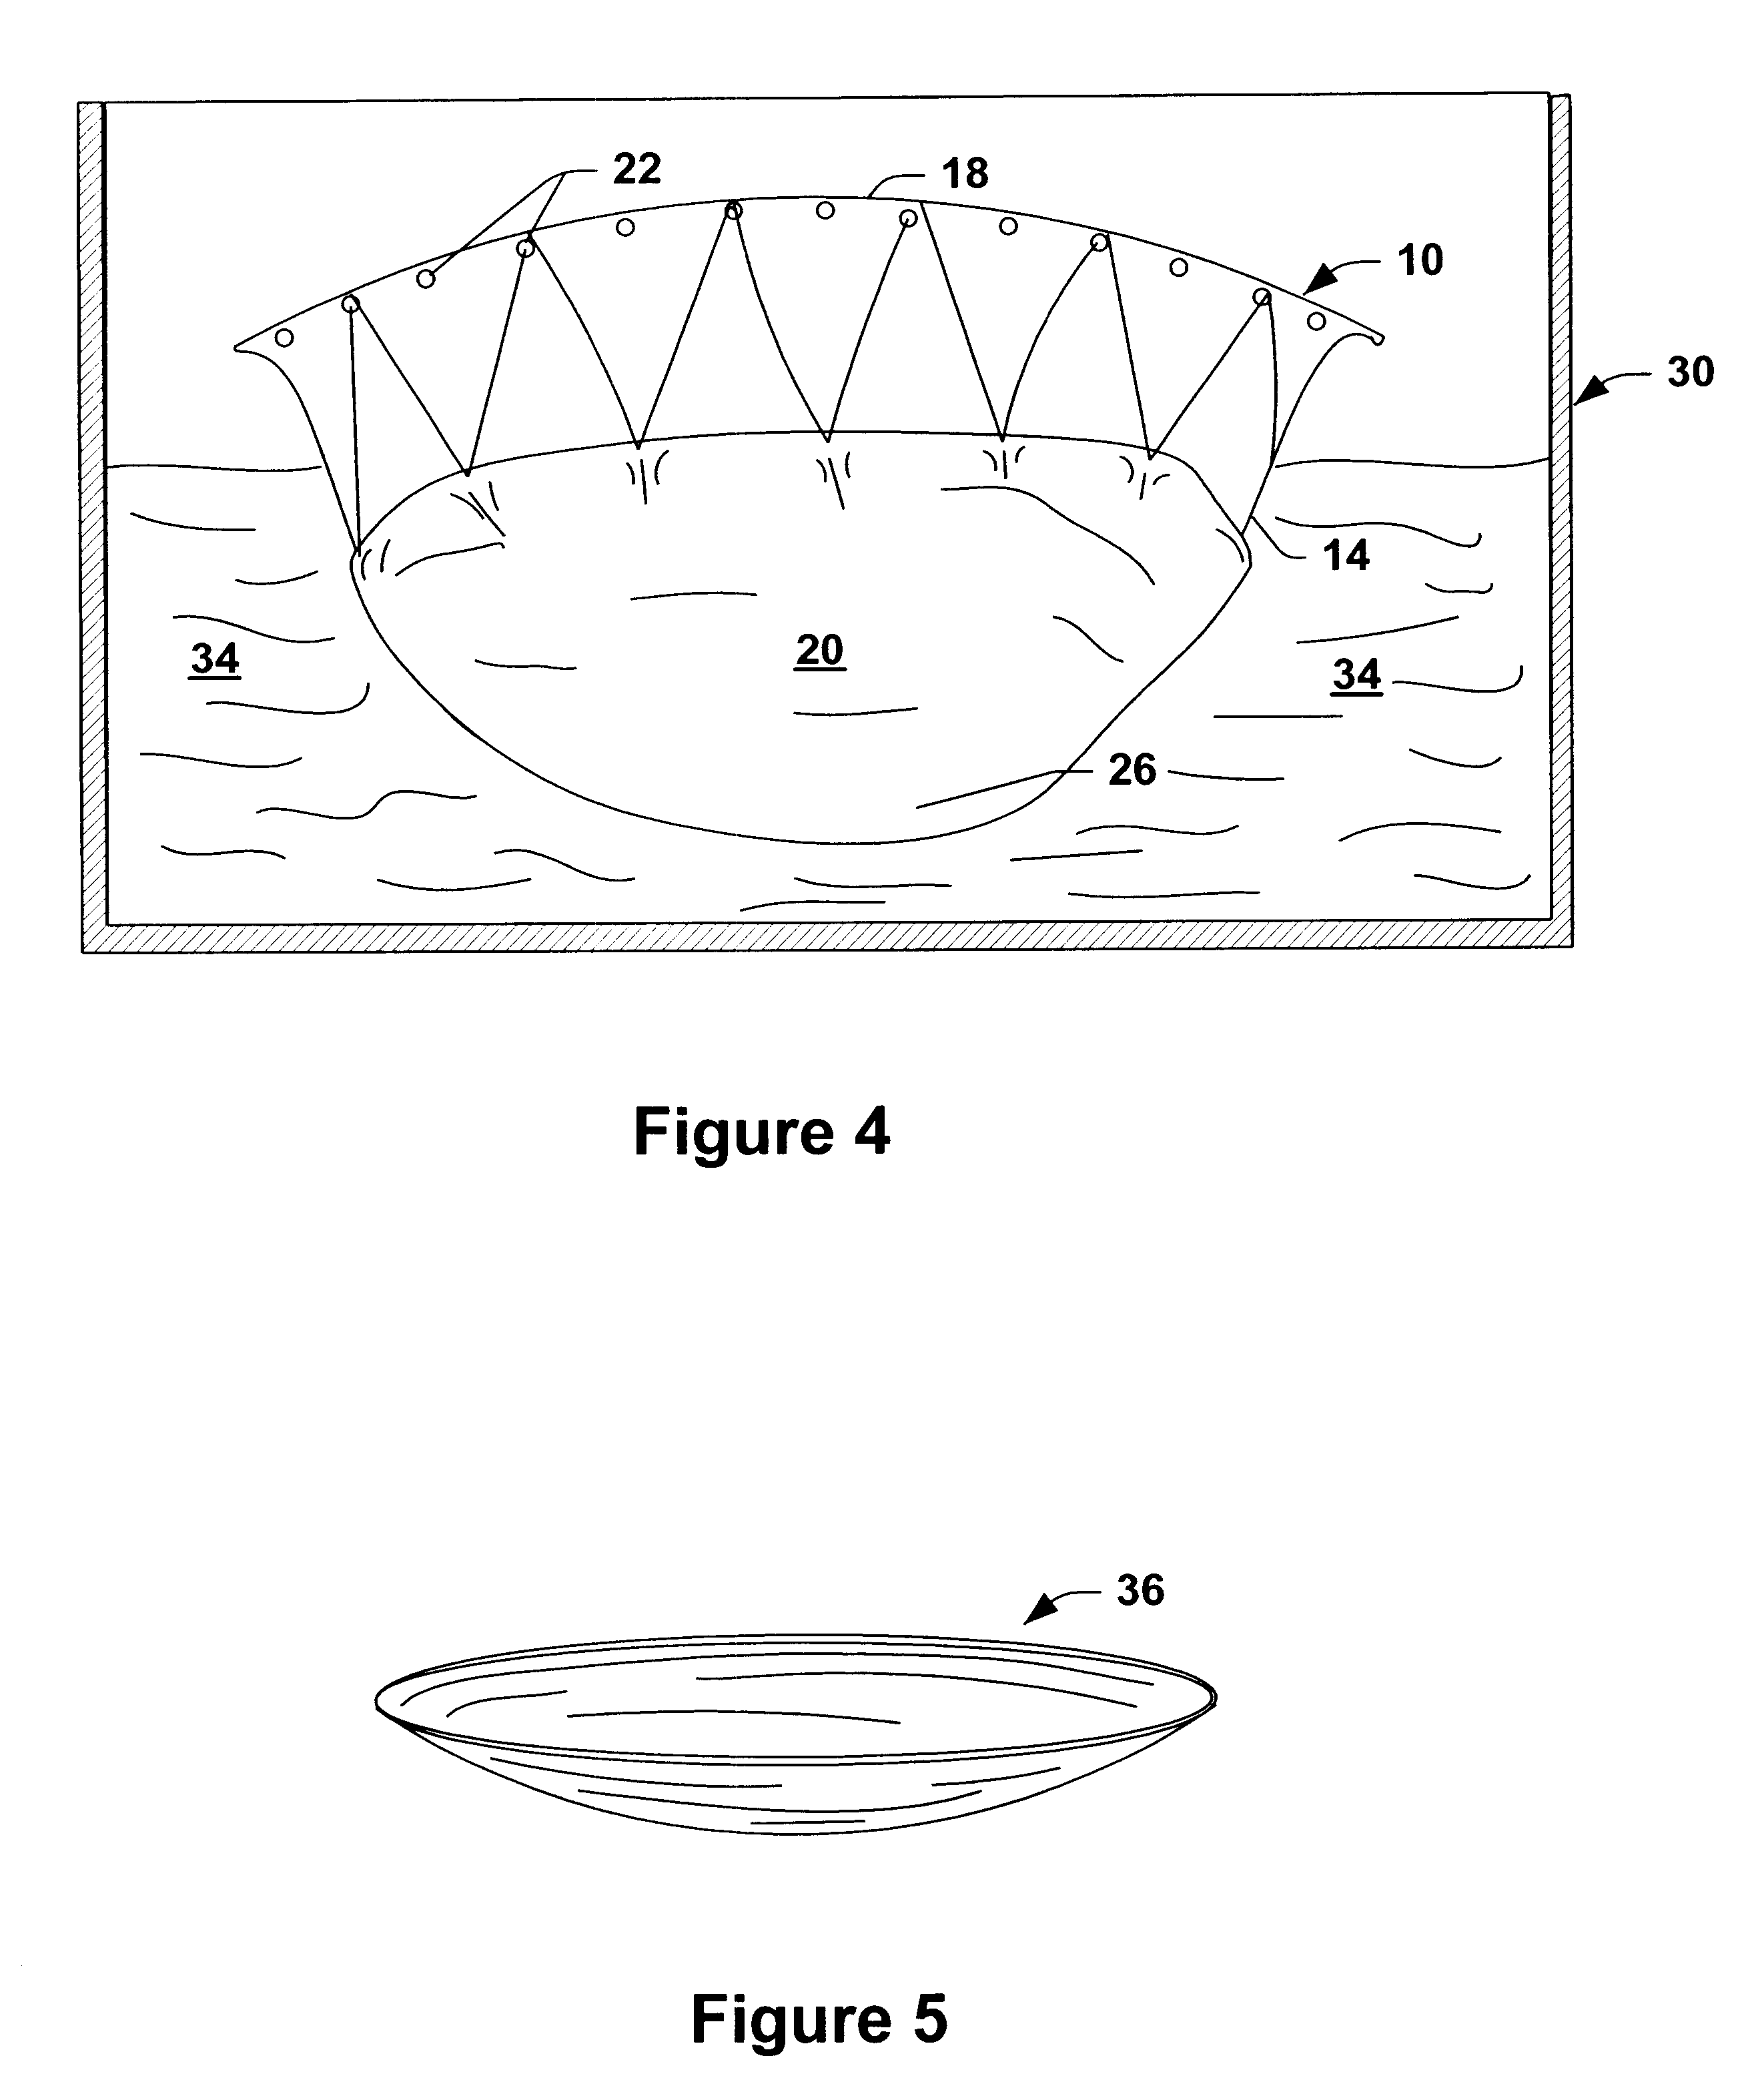 Curved implantable sheath and method of making same